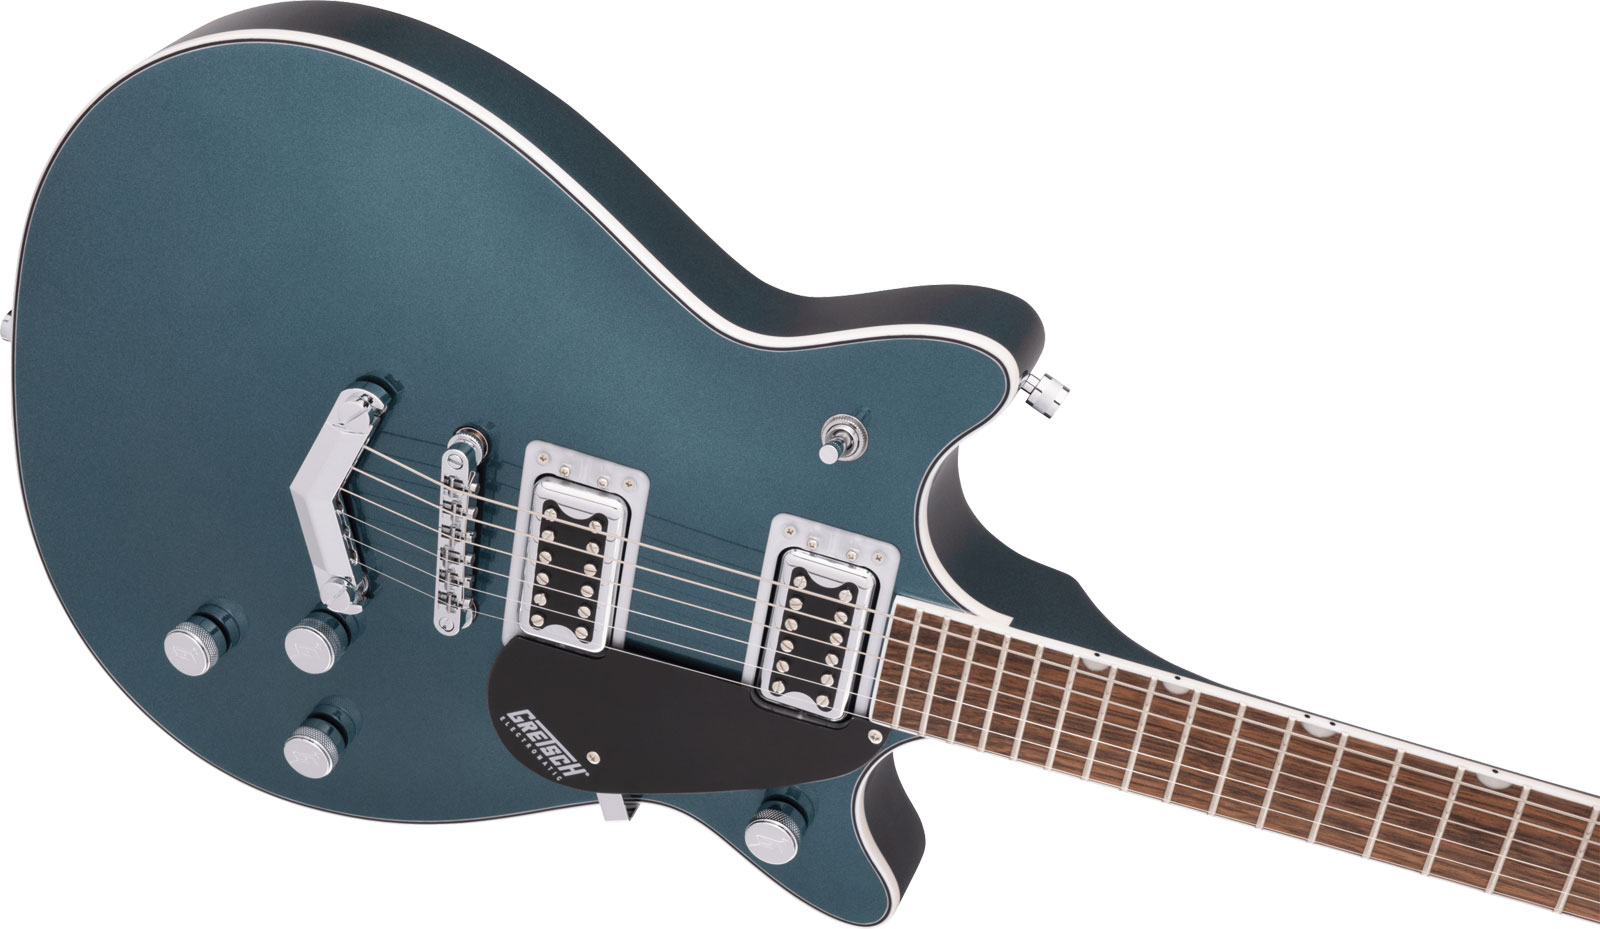 G5222 ELECTROMATIC DOUBLE JET BT WITH V-STOPTAIL LRL, JADE GREY METALLIC